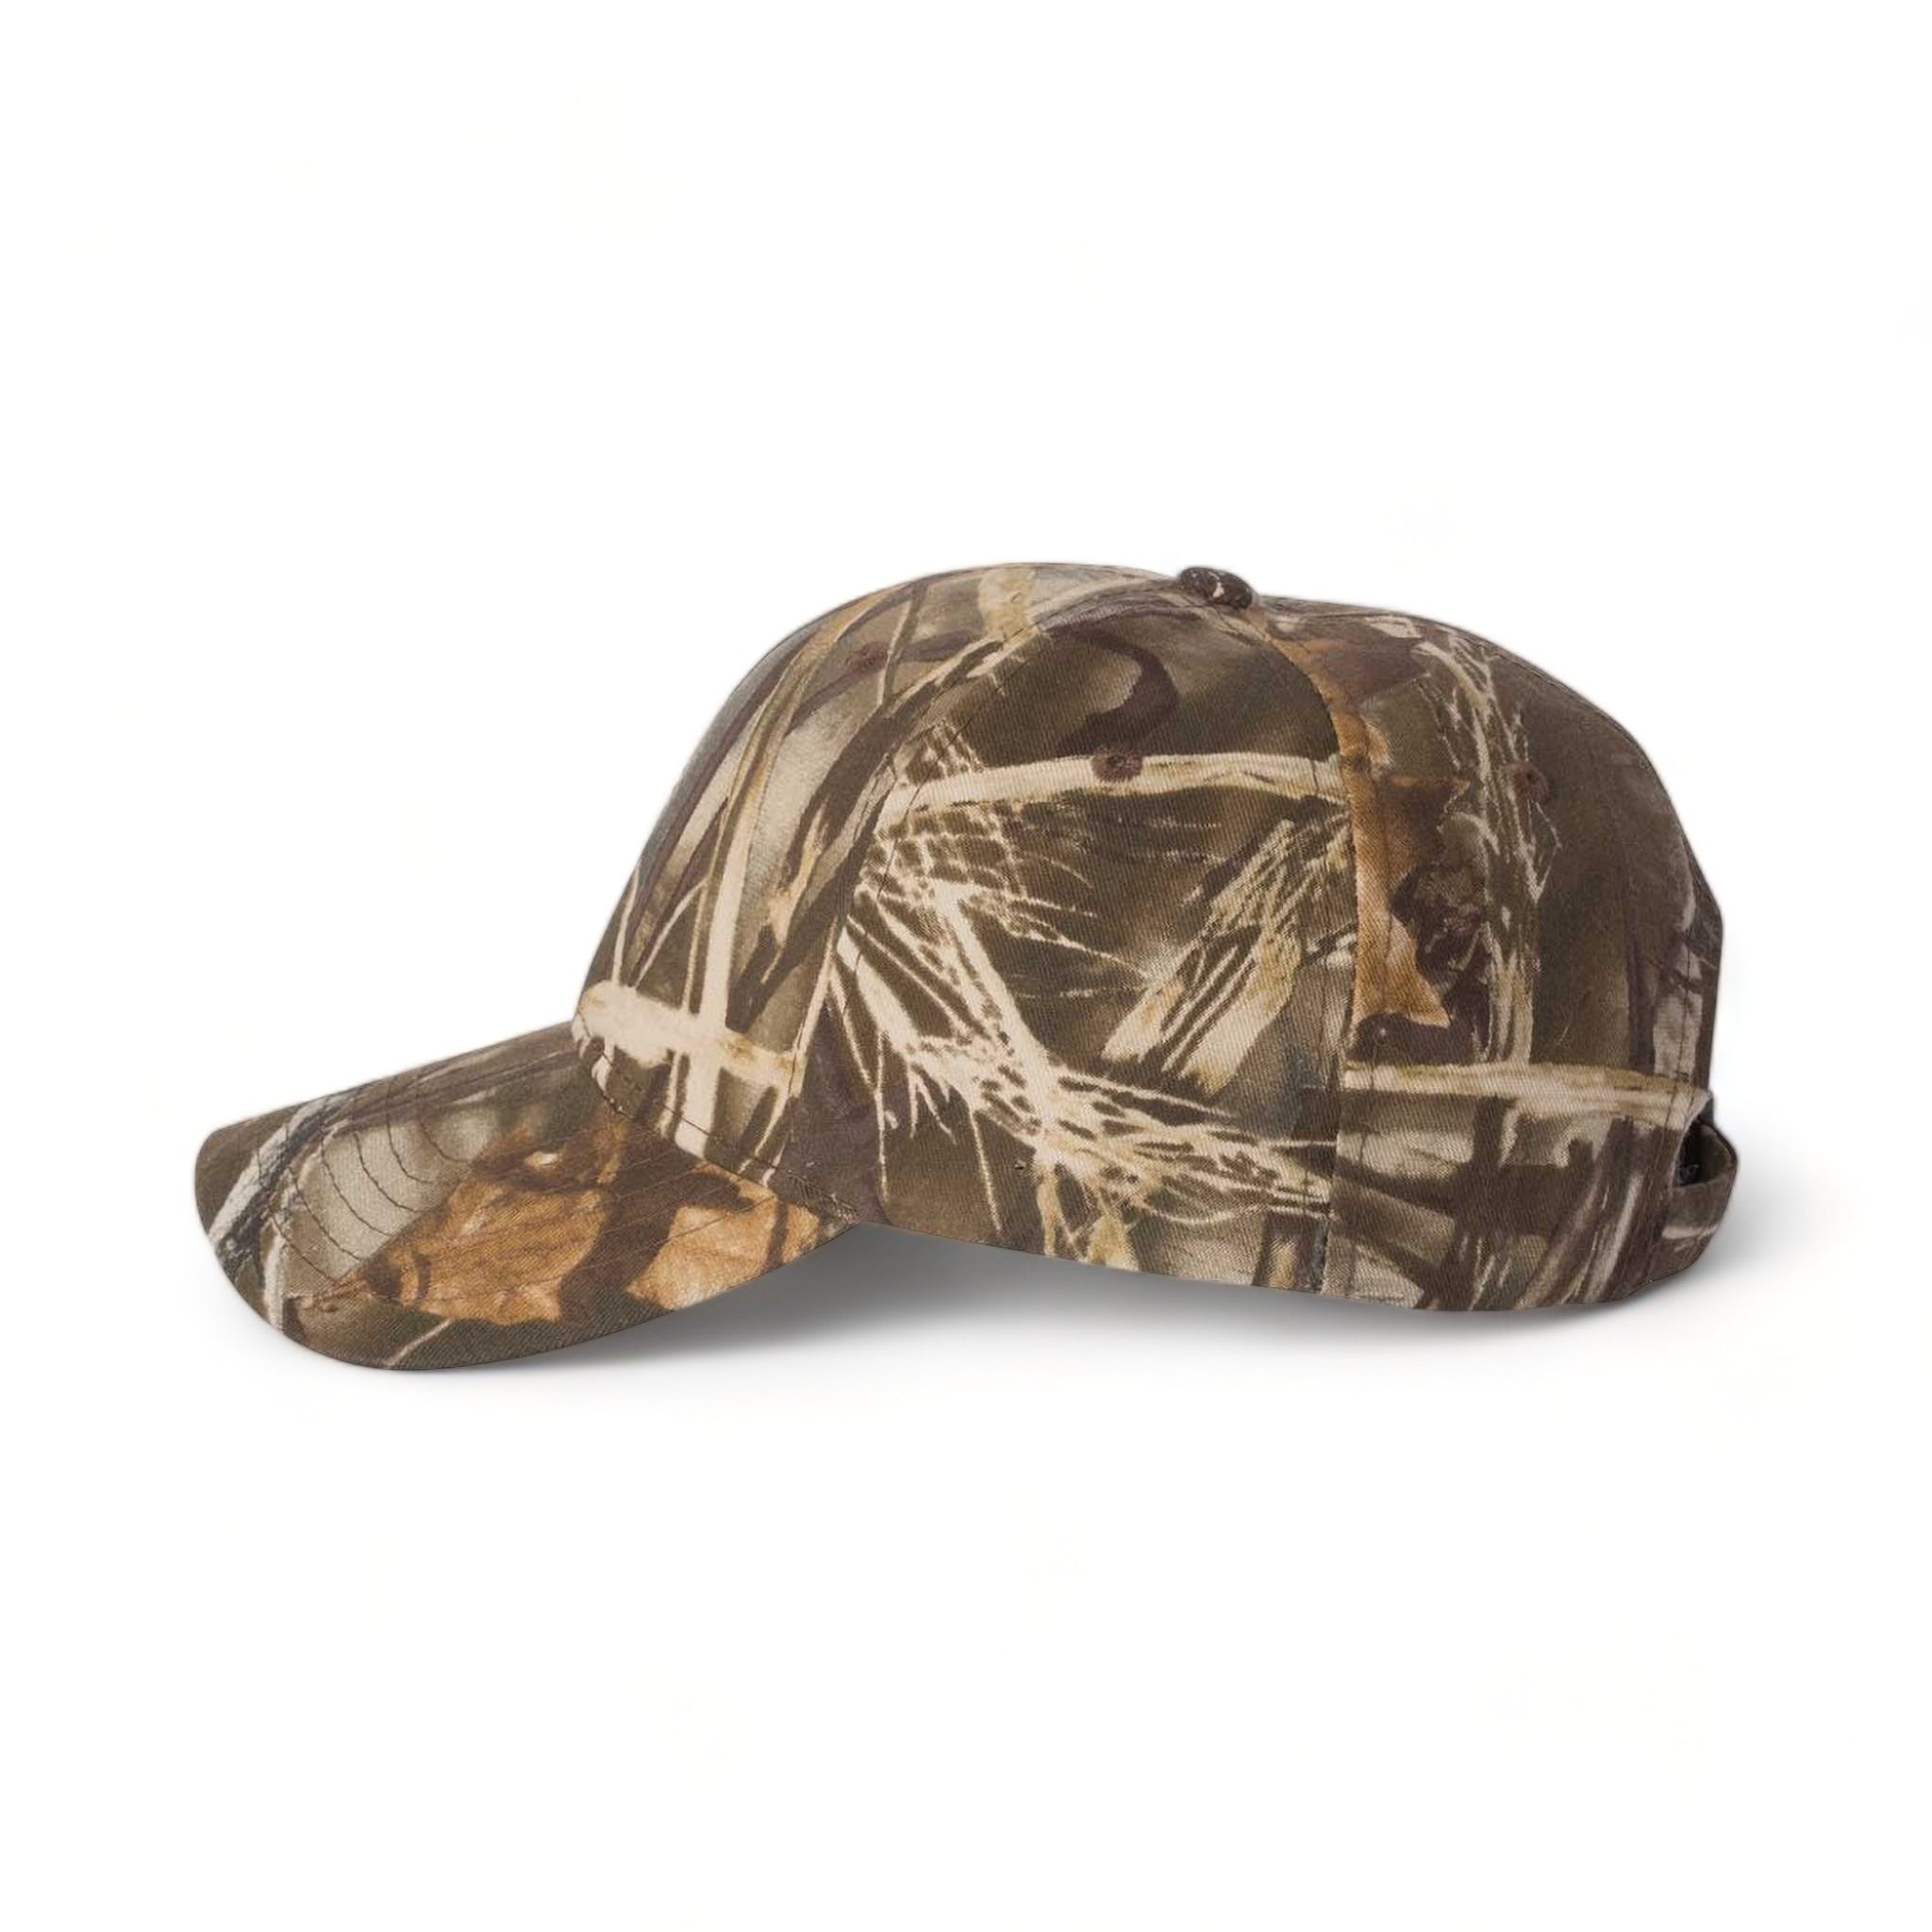 Side view of Kati LC10 custom hat in realtree max4